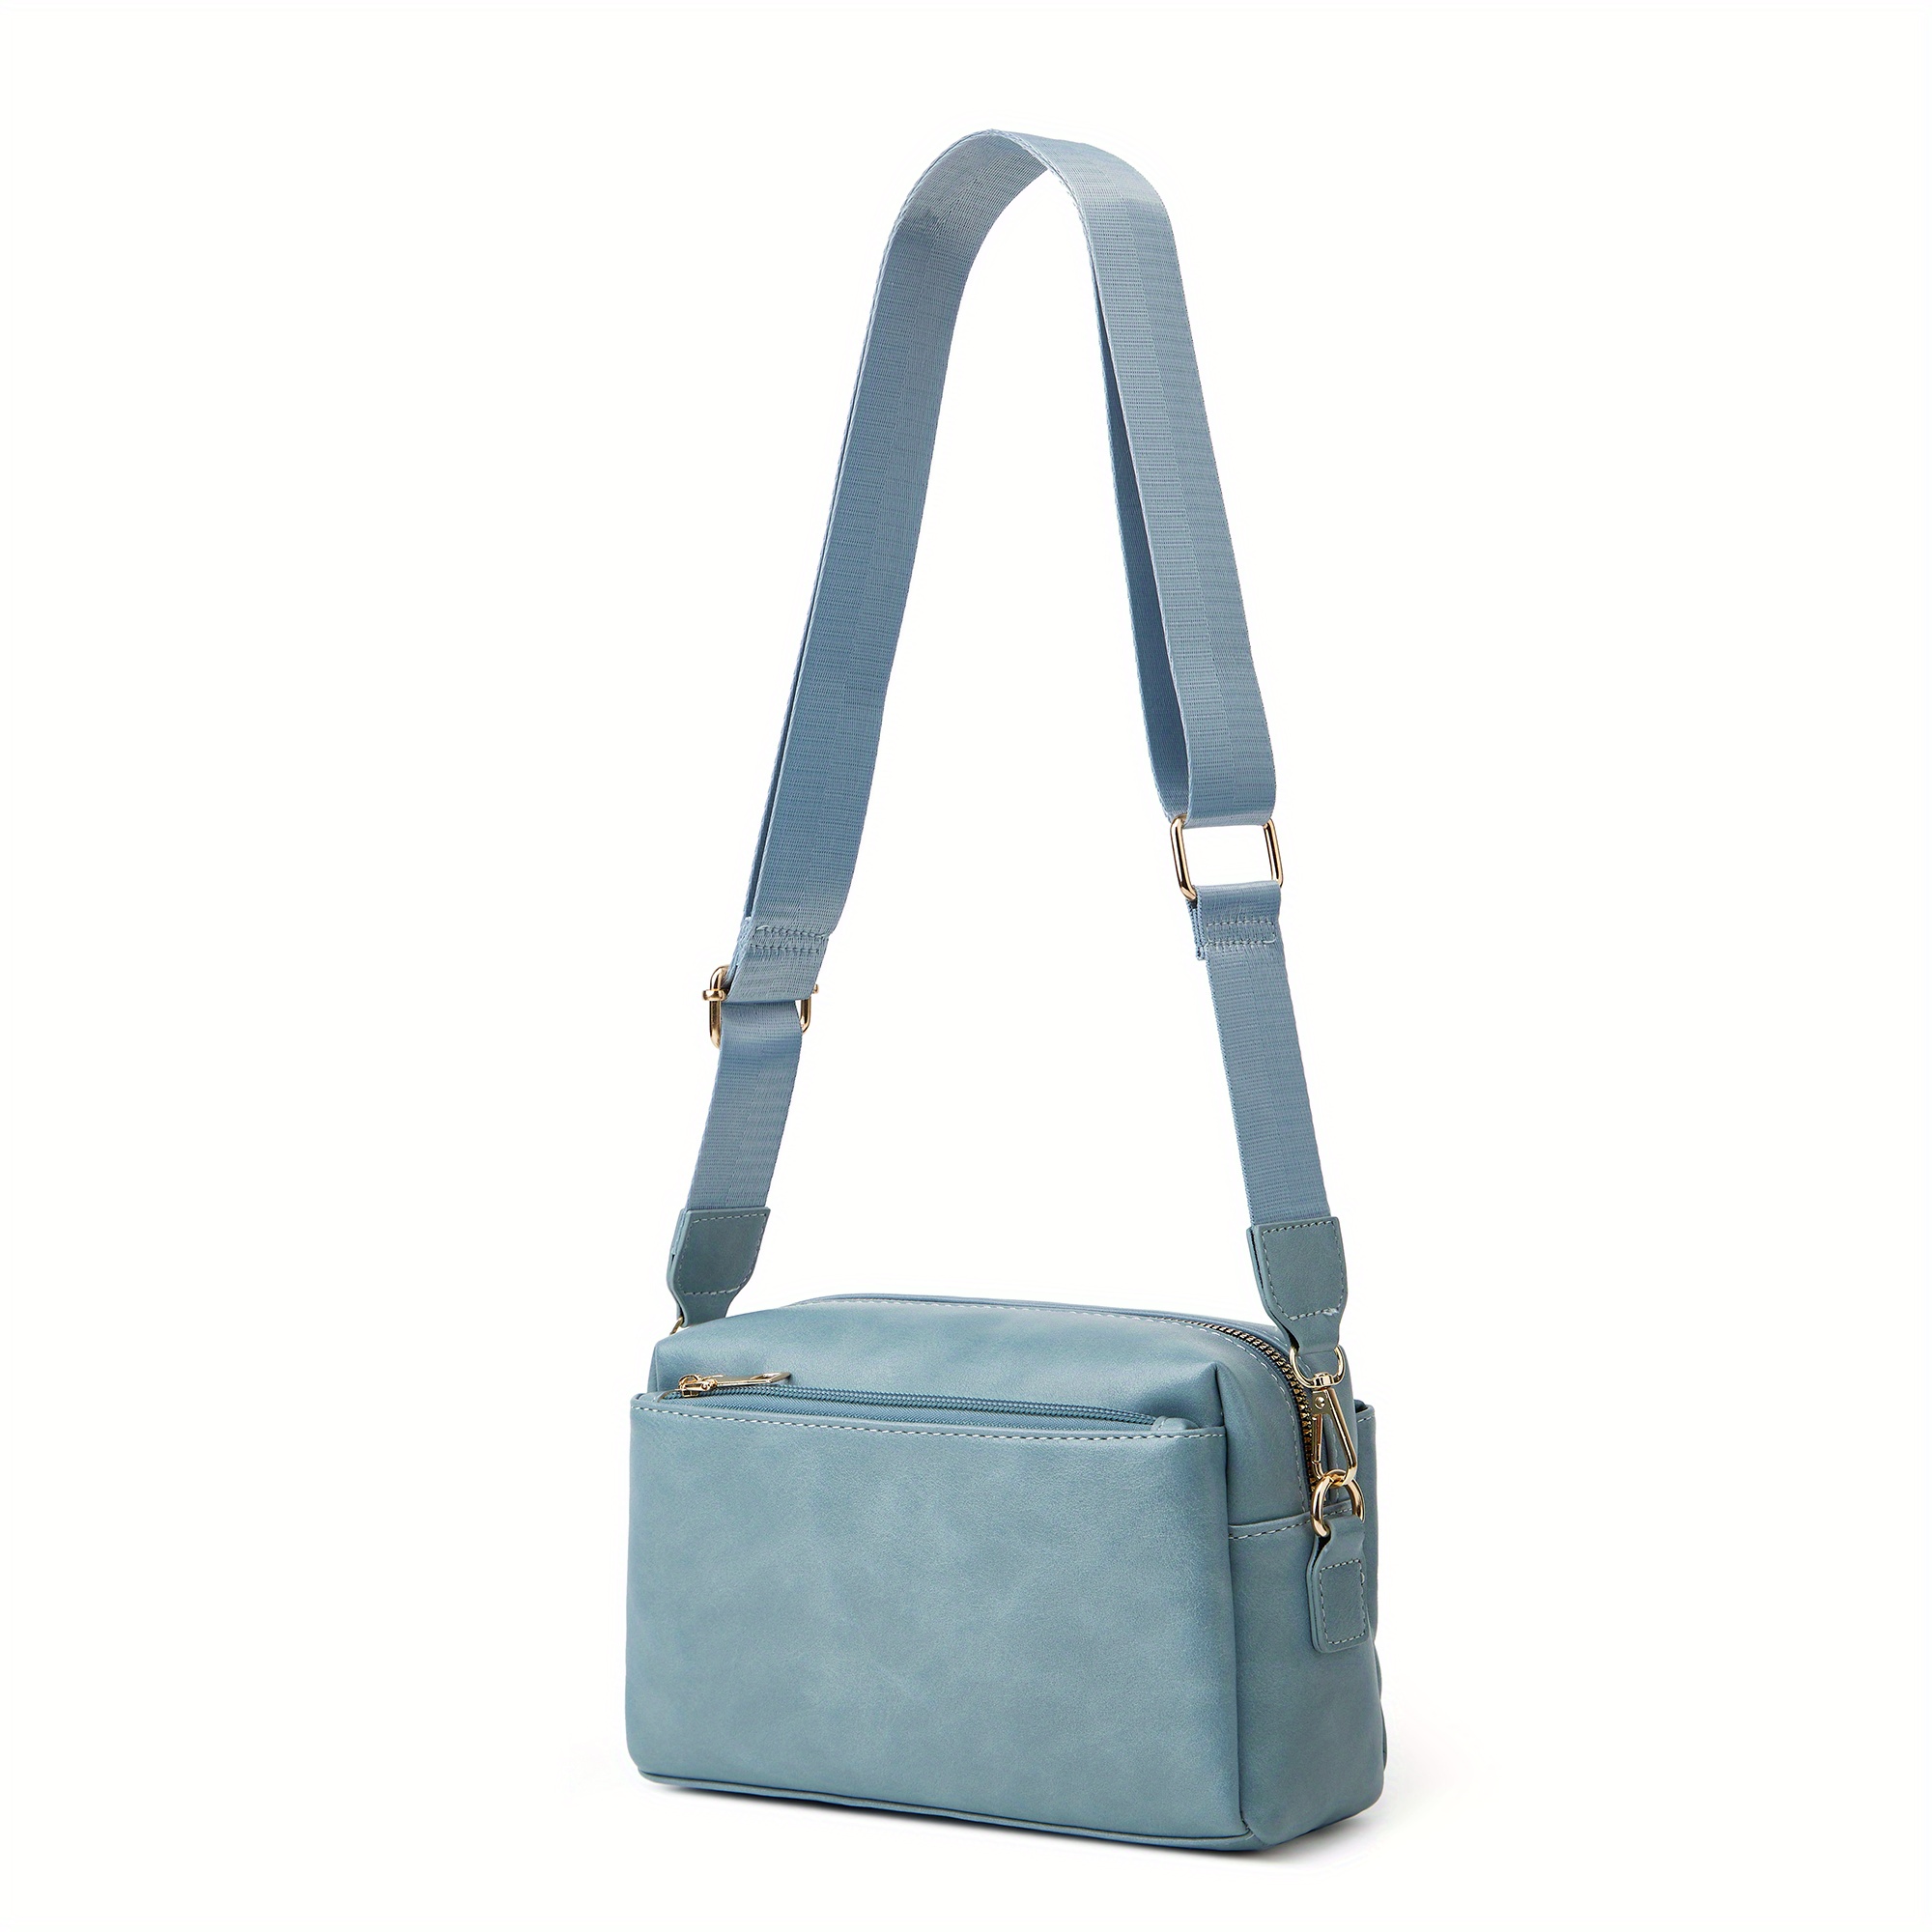 Women Crossbody Bag Small Shoulder Bag with Wide Strap,Blue